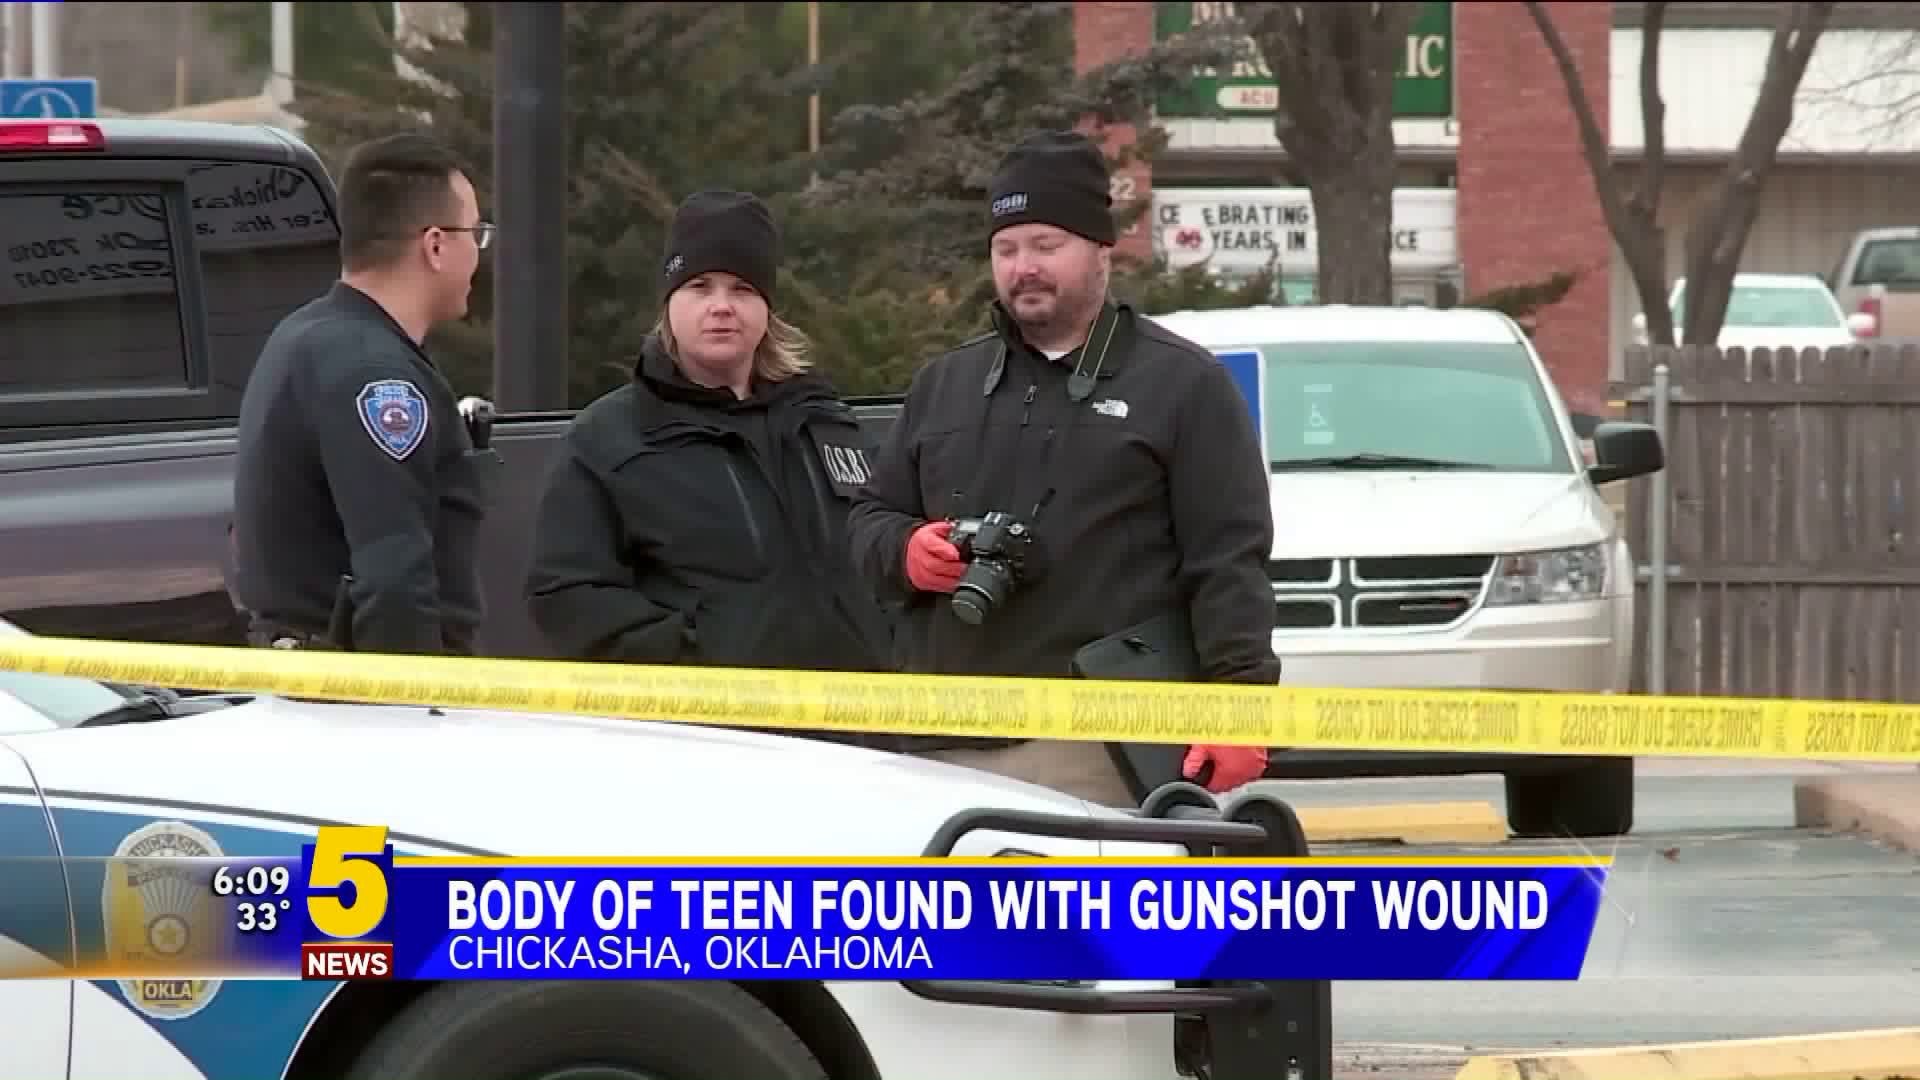 Body Of Teen Found With Gunshot Wound In Oklahoma